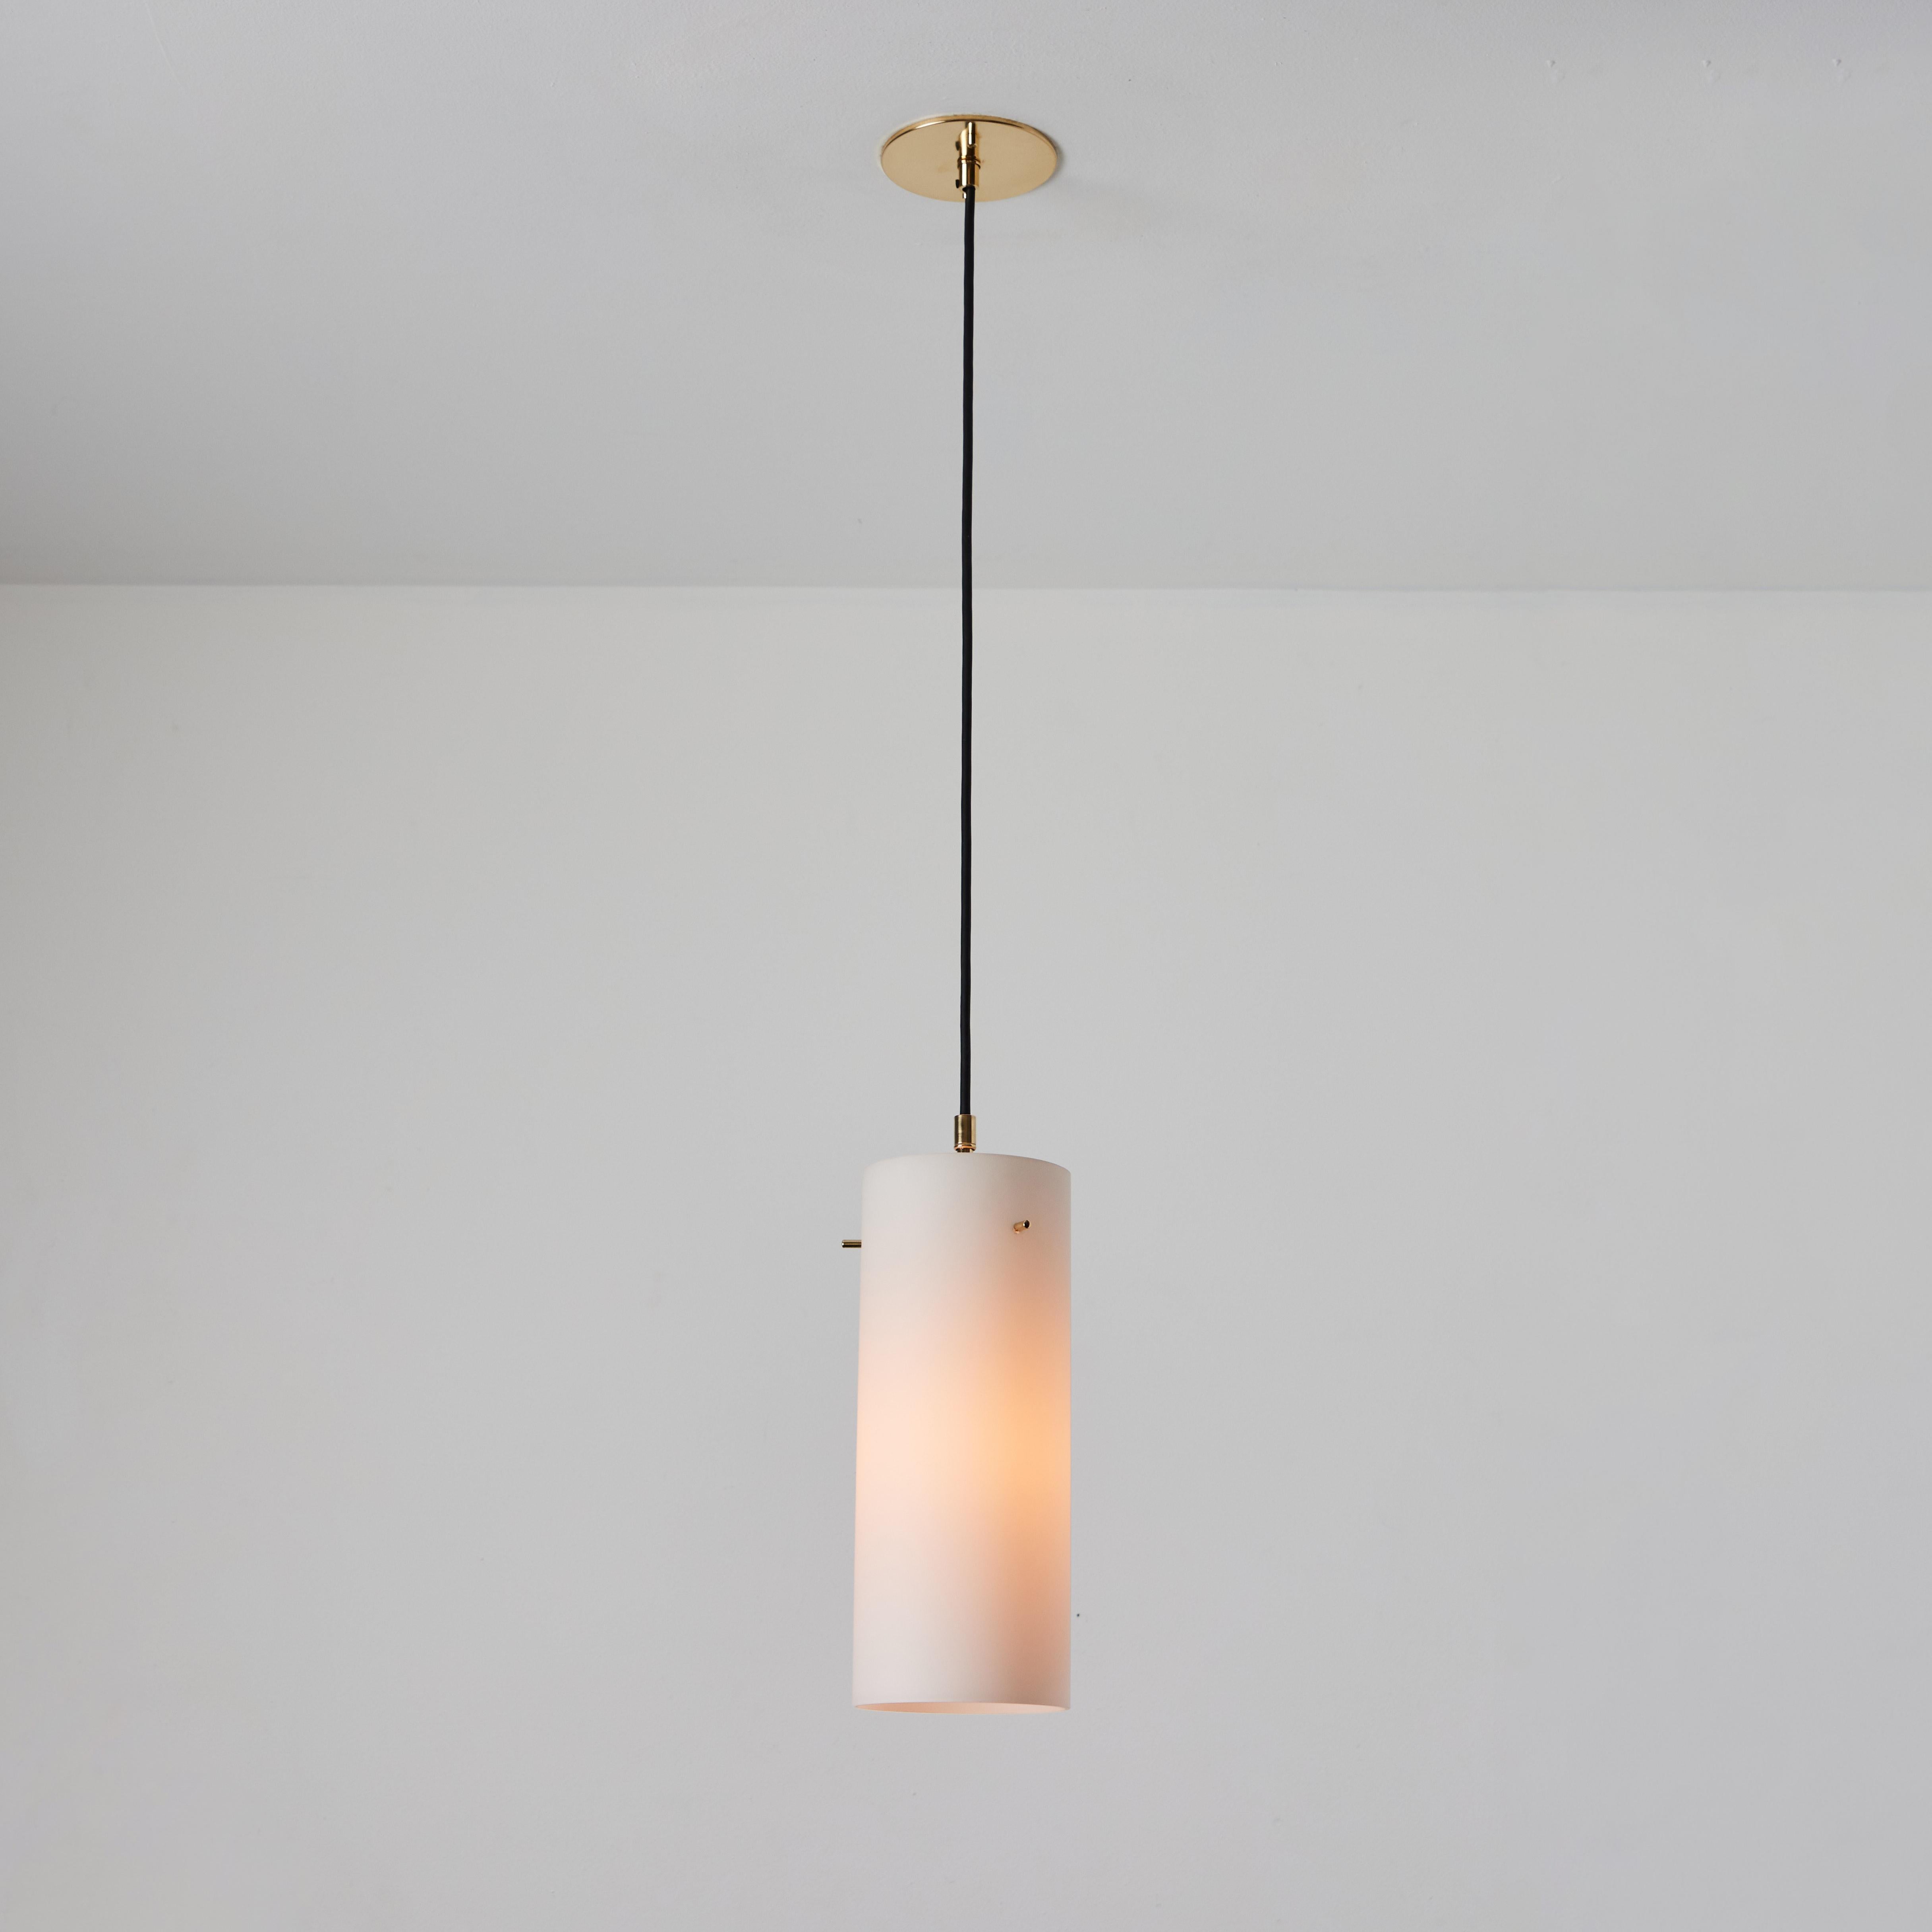 1950s Stilux Milano Opaline Glass & Brass Pendant. Executed in sculptural cylindrical opaline glass with brass hardware. A highly refined ceiling lamp light of attractive scale and incomparable refinement. Unmarked.

Stilux was one of the most